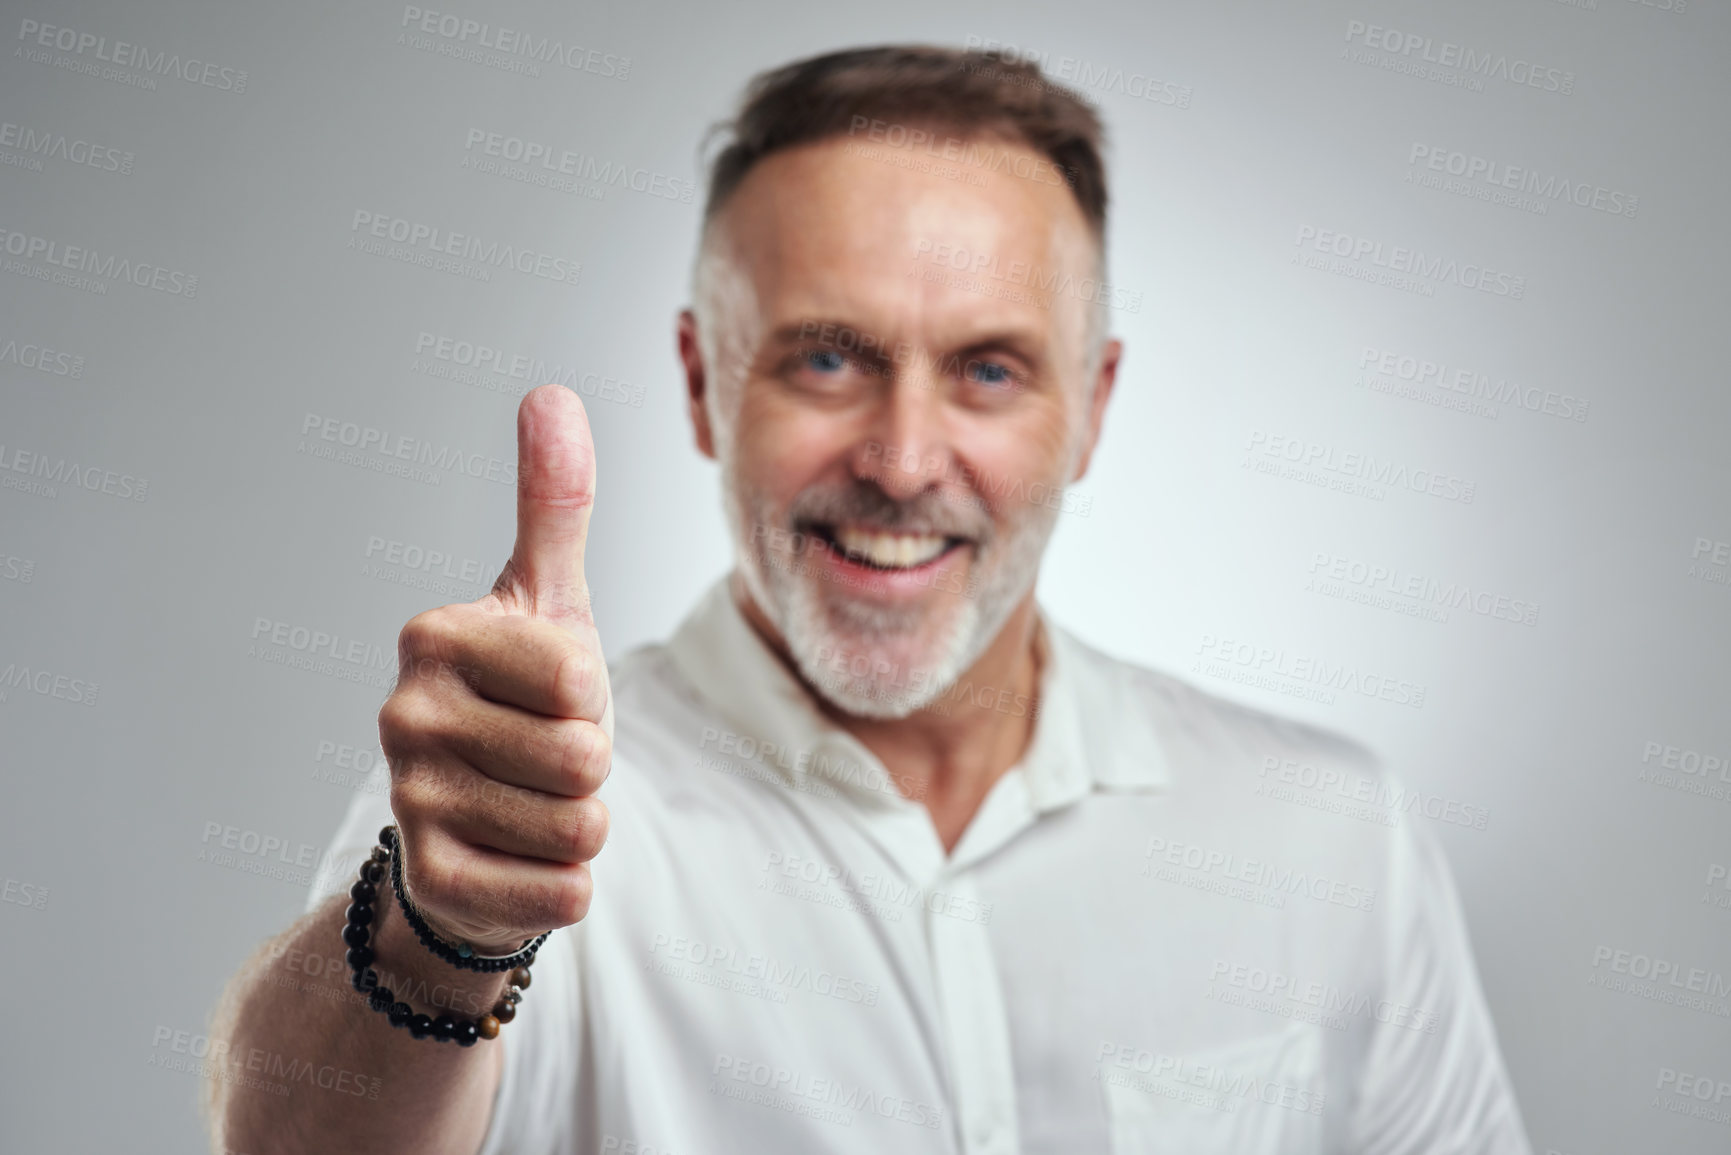 Buy stock photo Studio portrait of a mature man showing thumbs up against a grey background